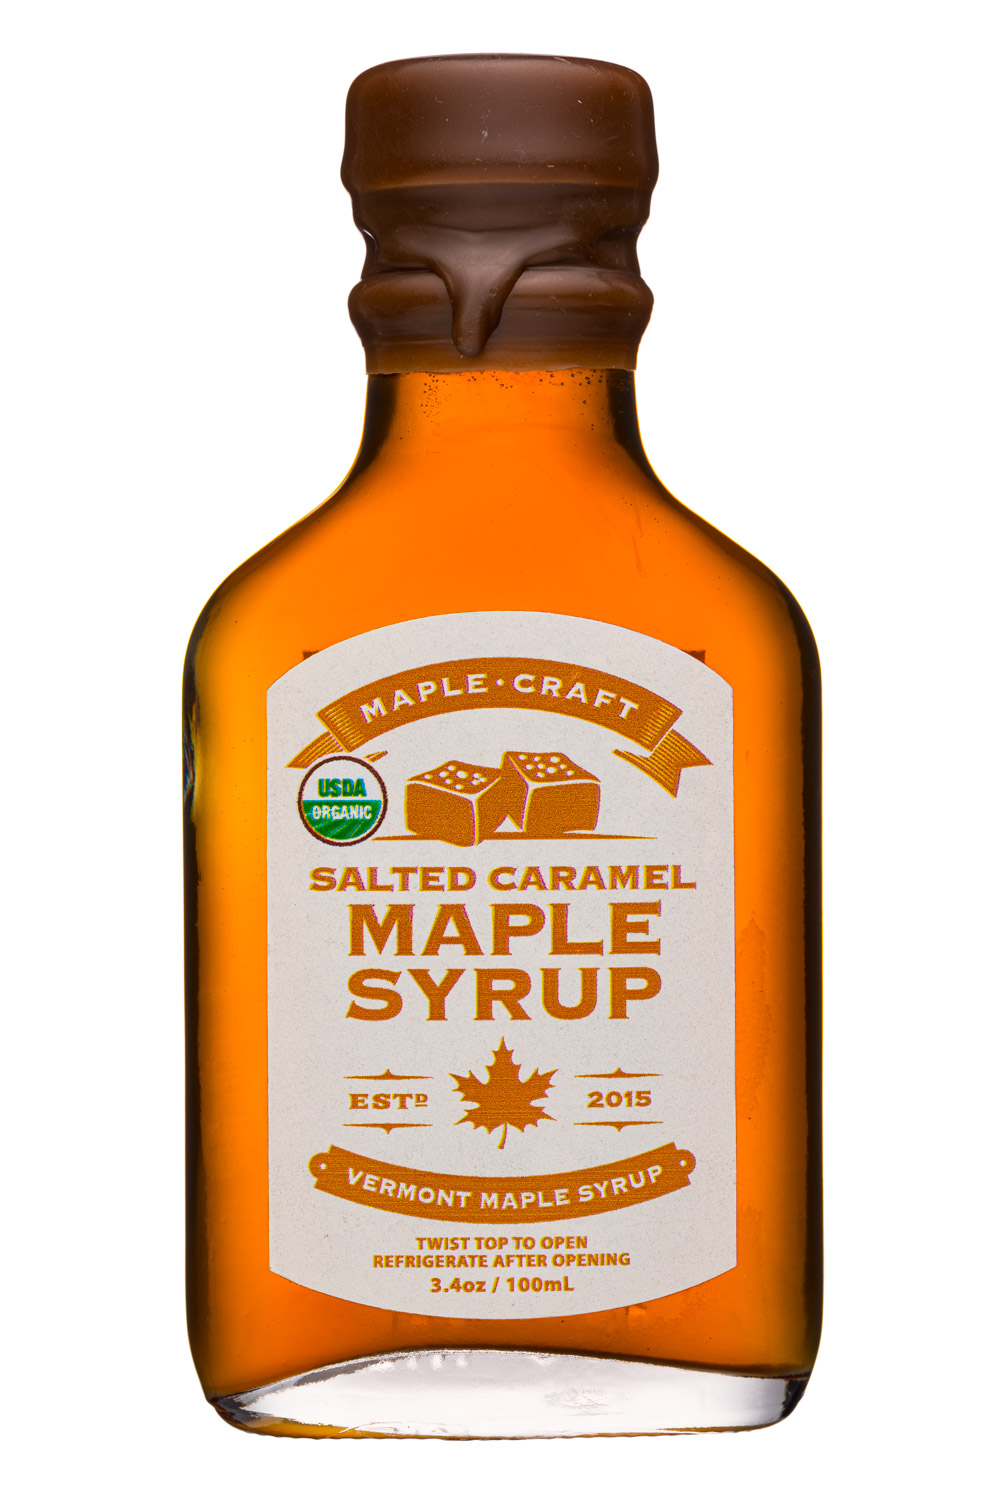 Salted Caramel Maple Syrup